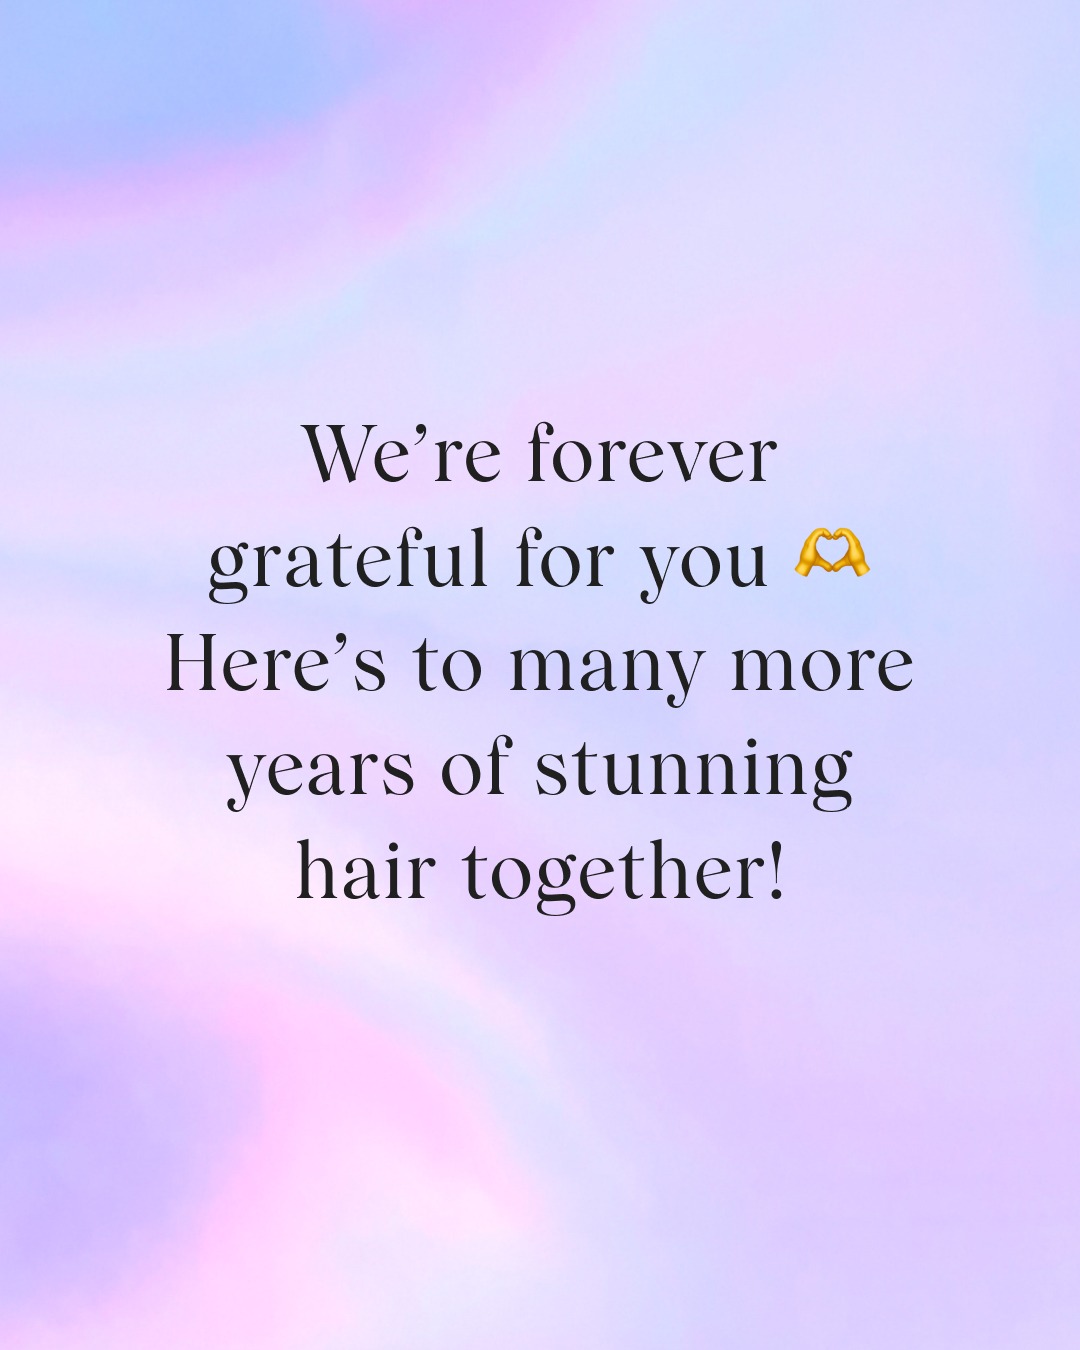 We are forever grateful for you. Here's to many more years of stunning hair together